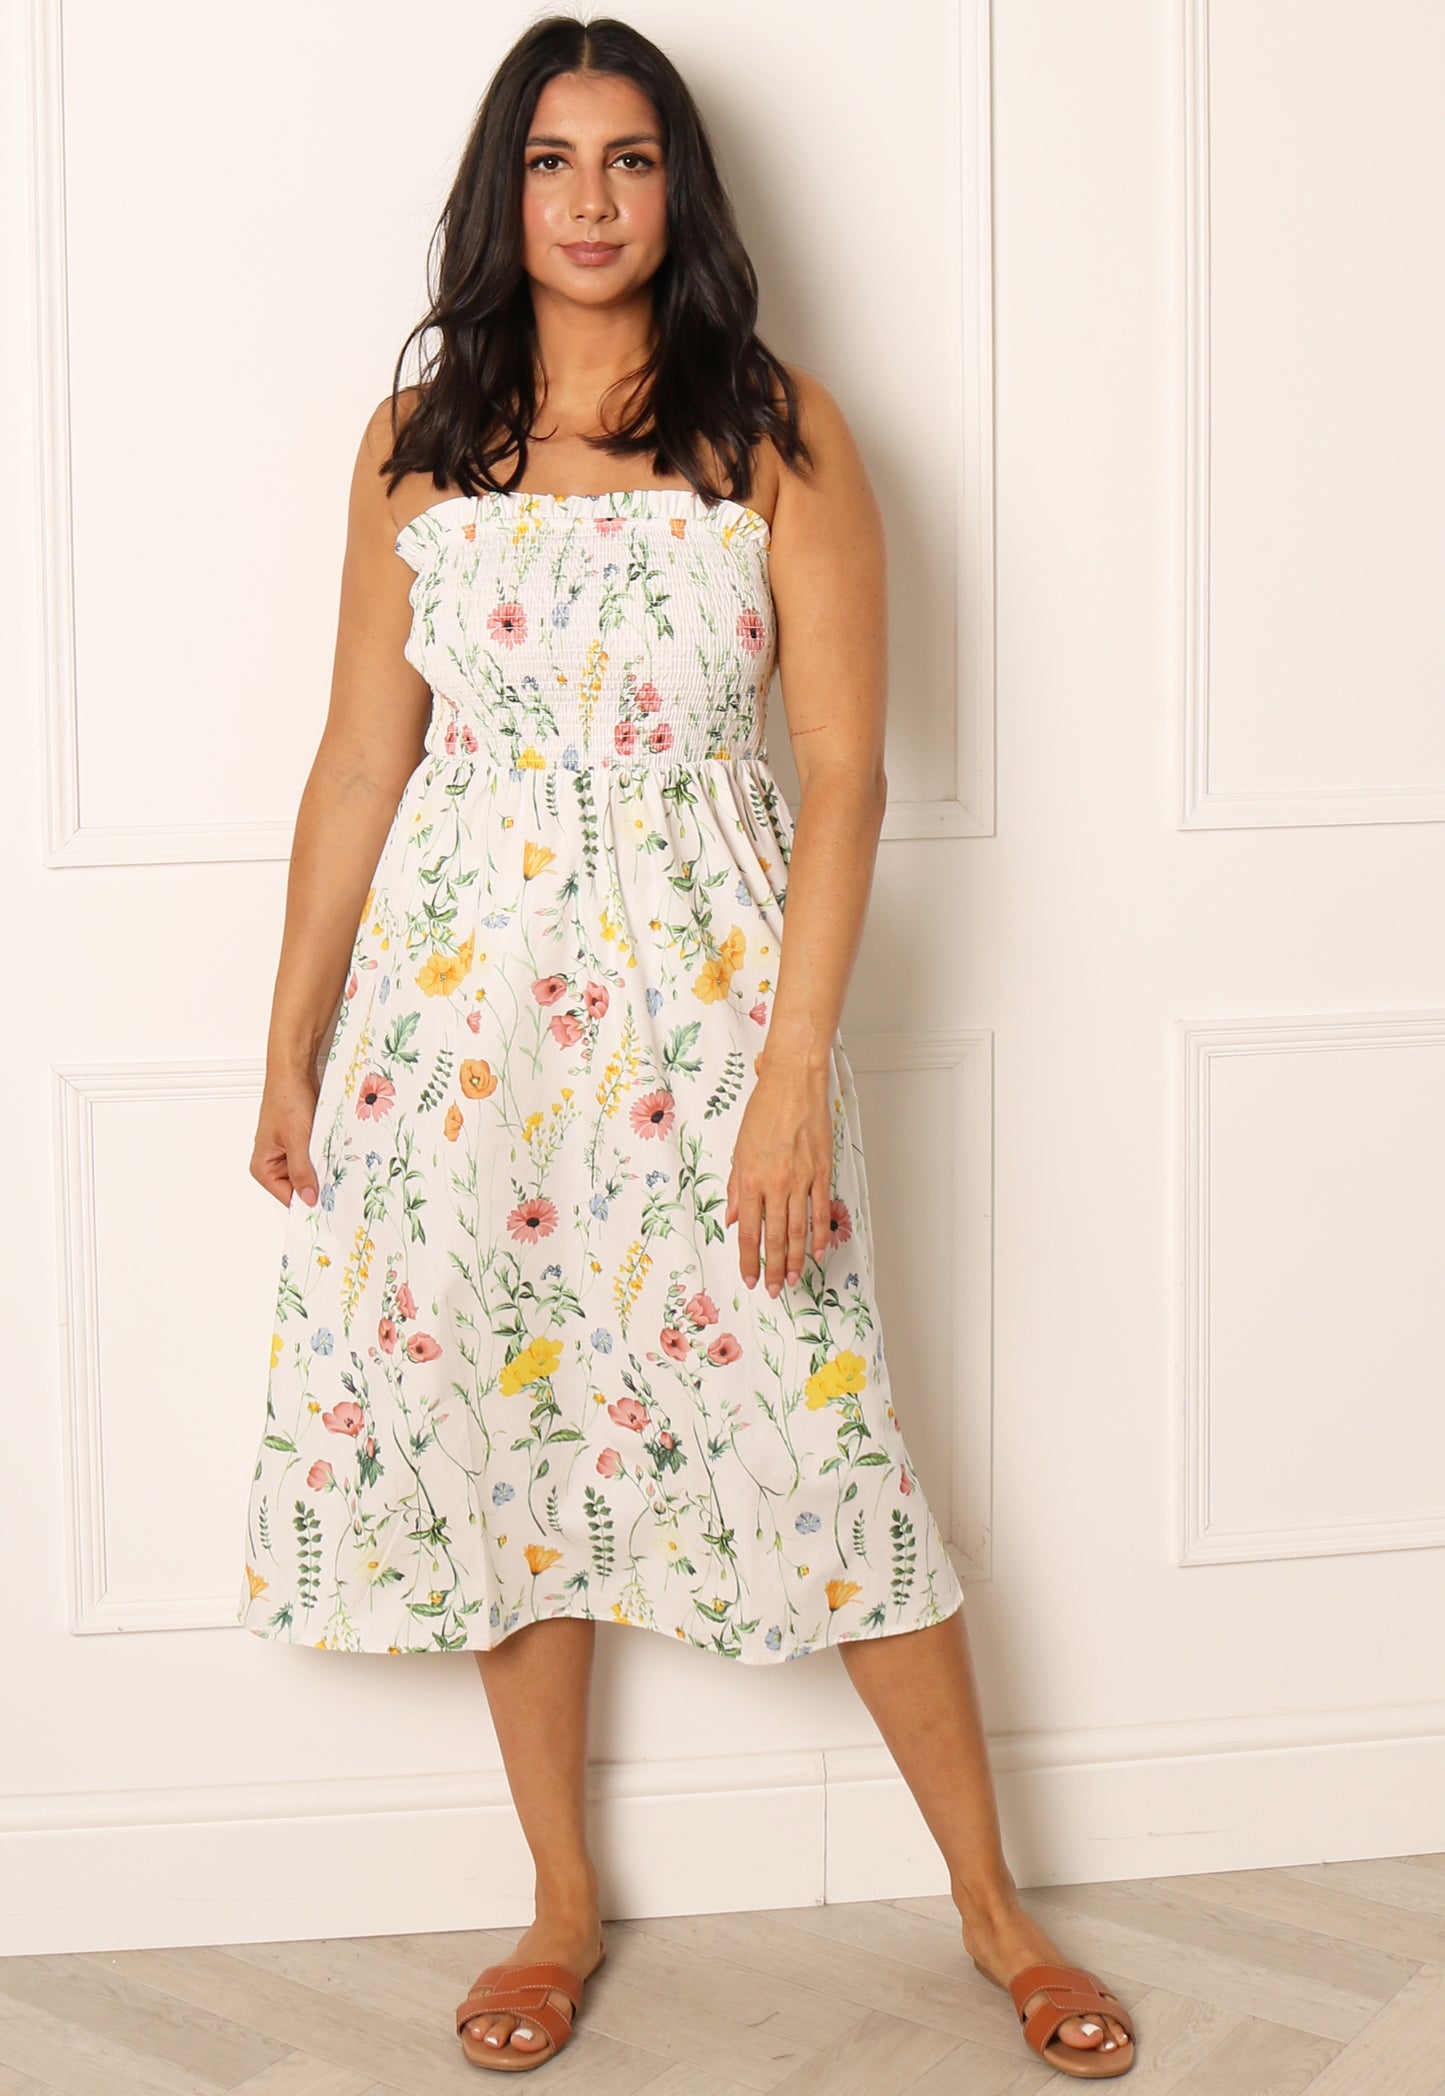 VILA Capro Floral Shirred Bandeau Cotton Midi Sun Dress in White, Yellow & Pink Tones - One Nation Clothing